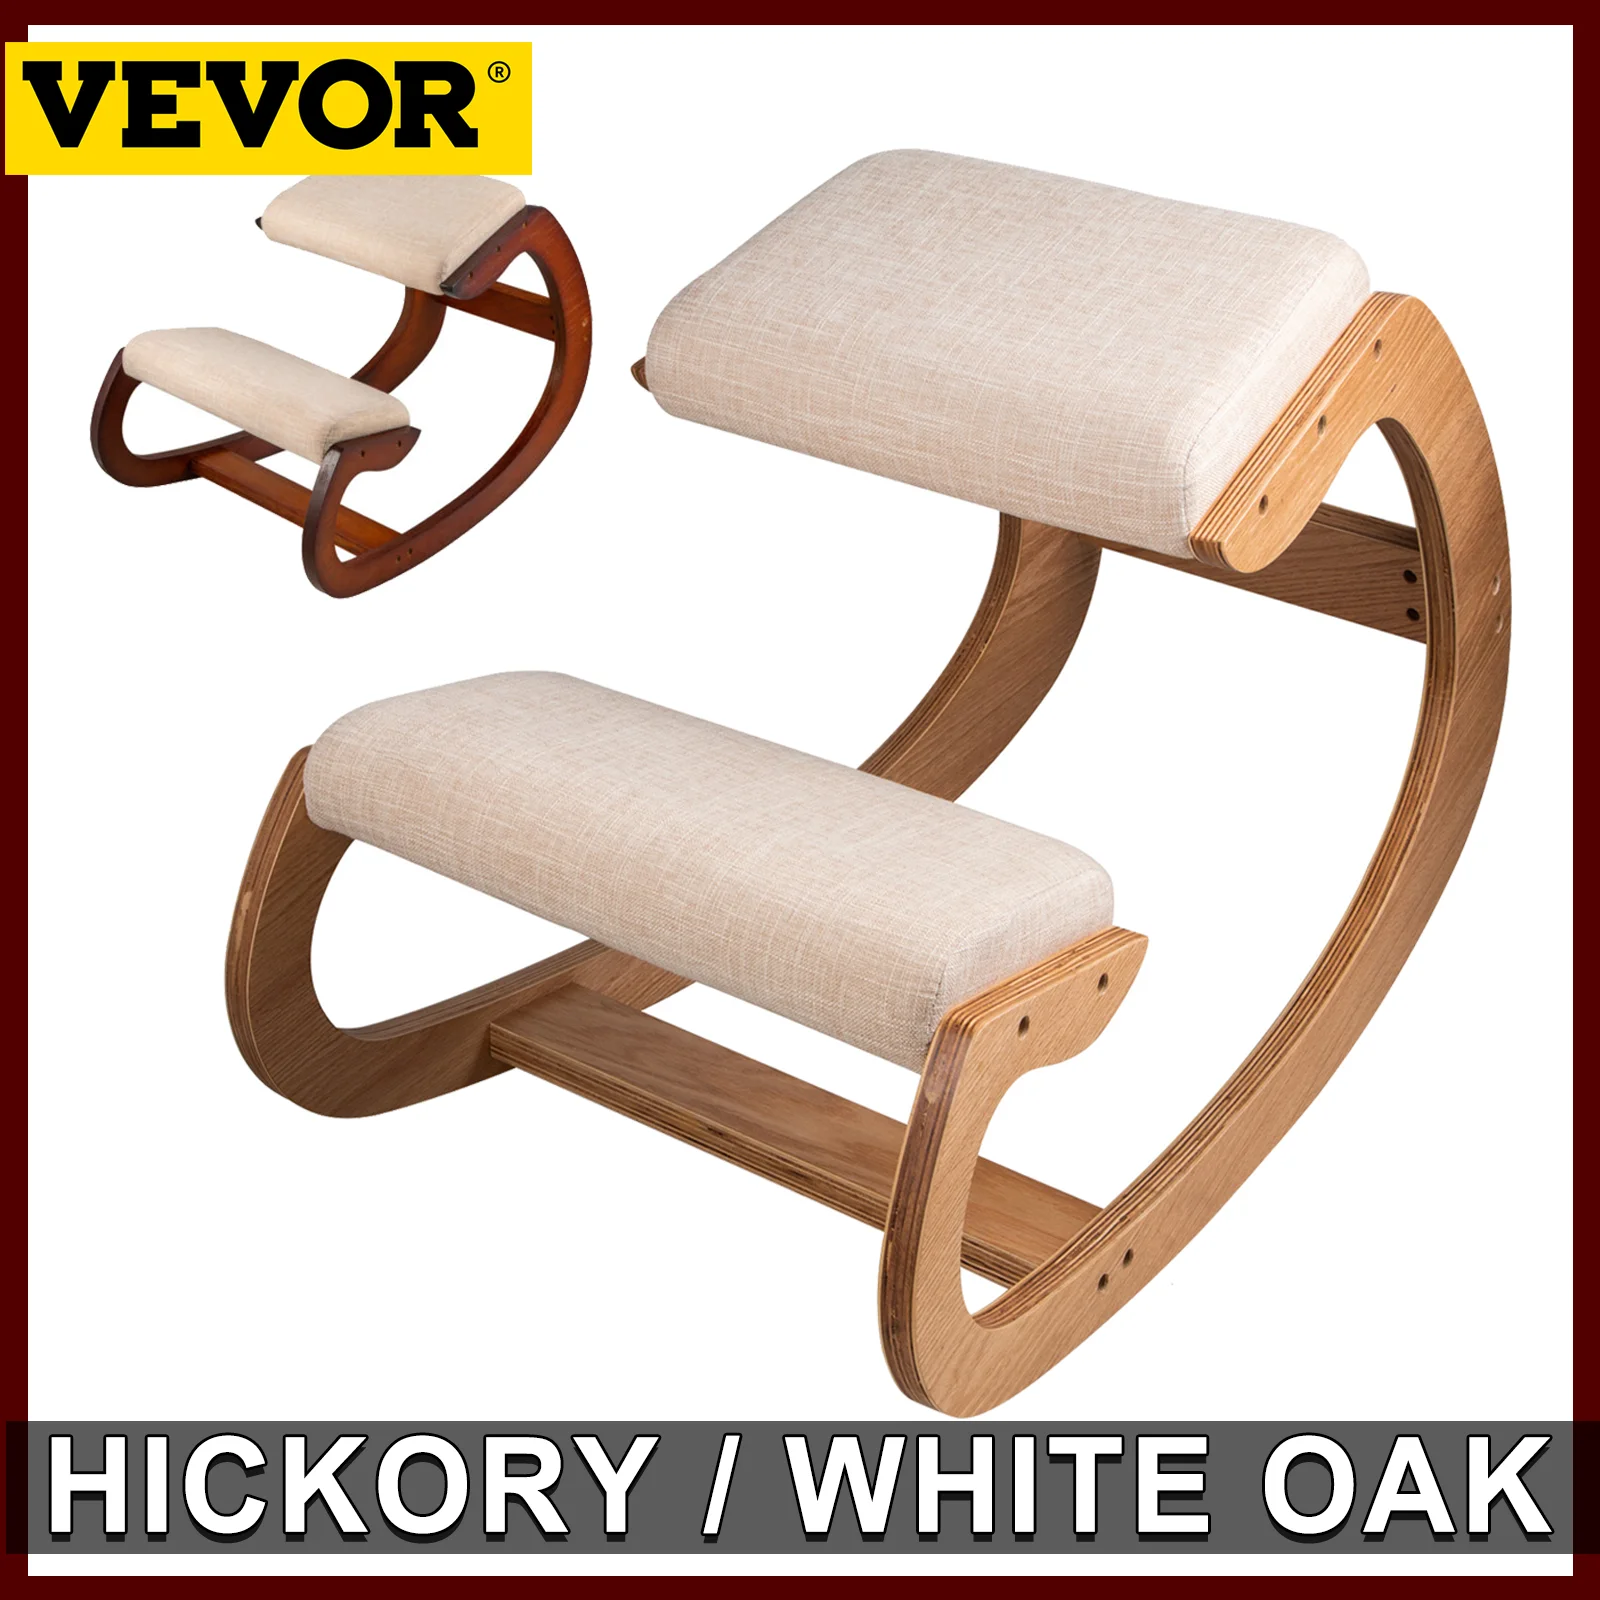 VEVOR Ergonomic Kneeling Chair Stool W/ Thick Cushion Home Office Chair Improving Body Posture Rocking Wood Knee Computer Chair